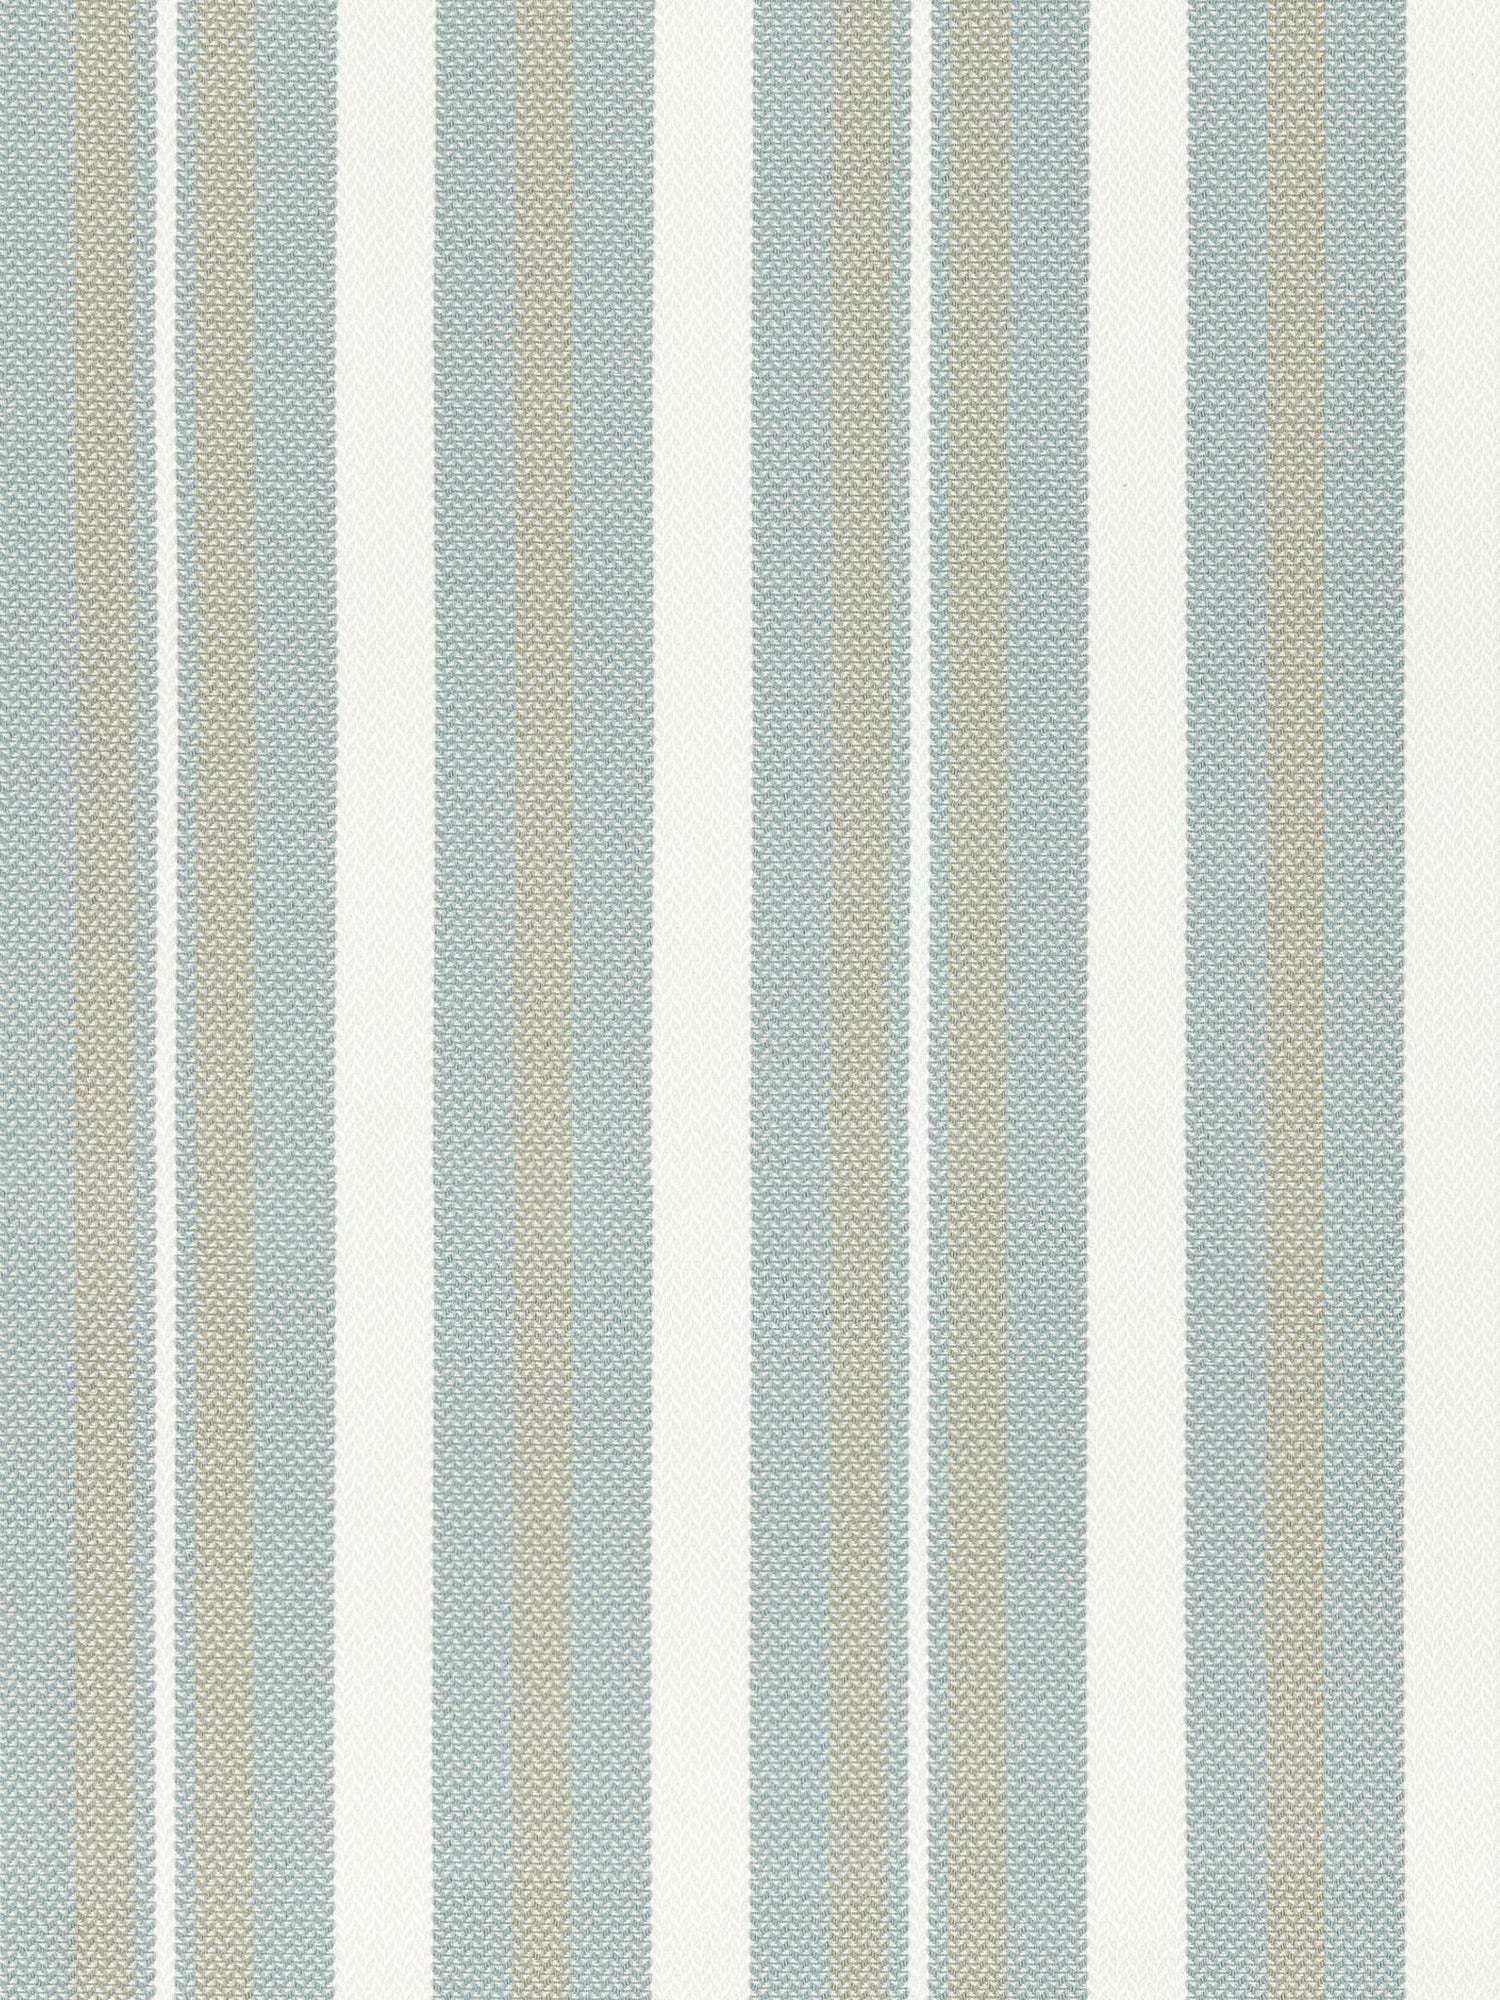 Santorini Stripe fabric in seagull color - pattern number SC 000127188 - by Scalamandre in the Scalamandre Fabrics Book 1 collection